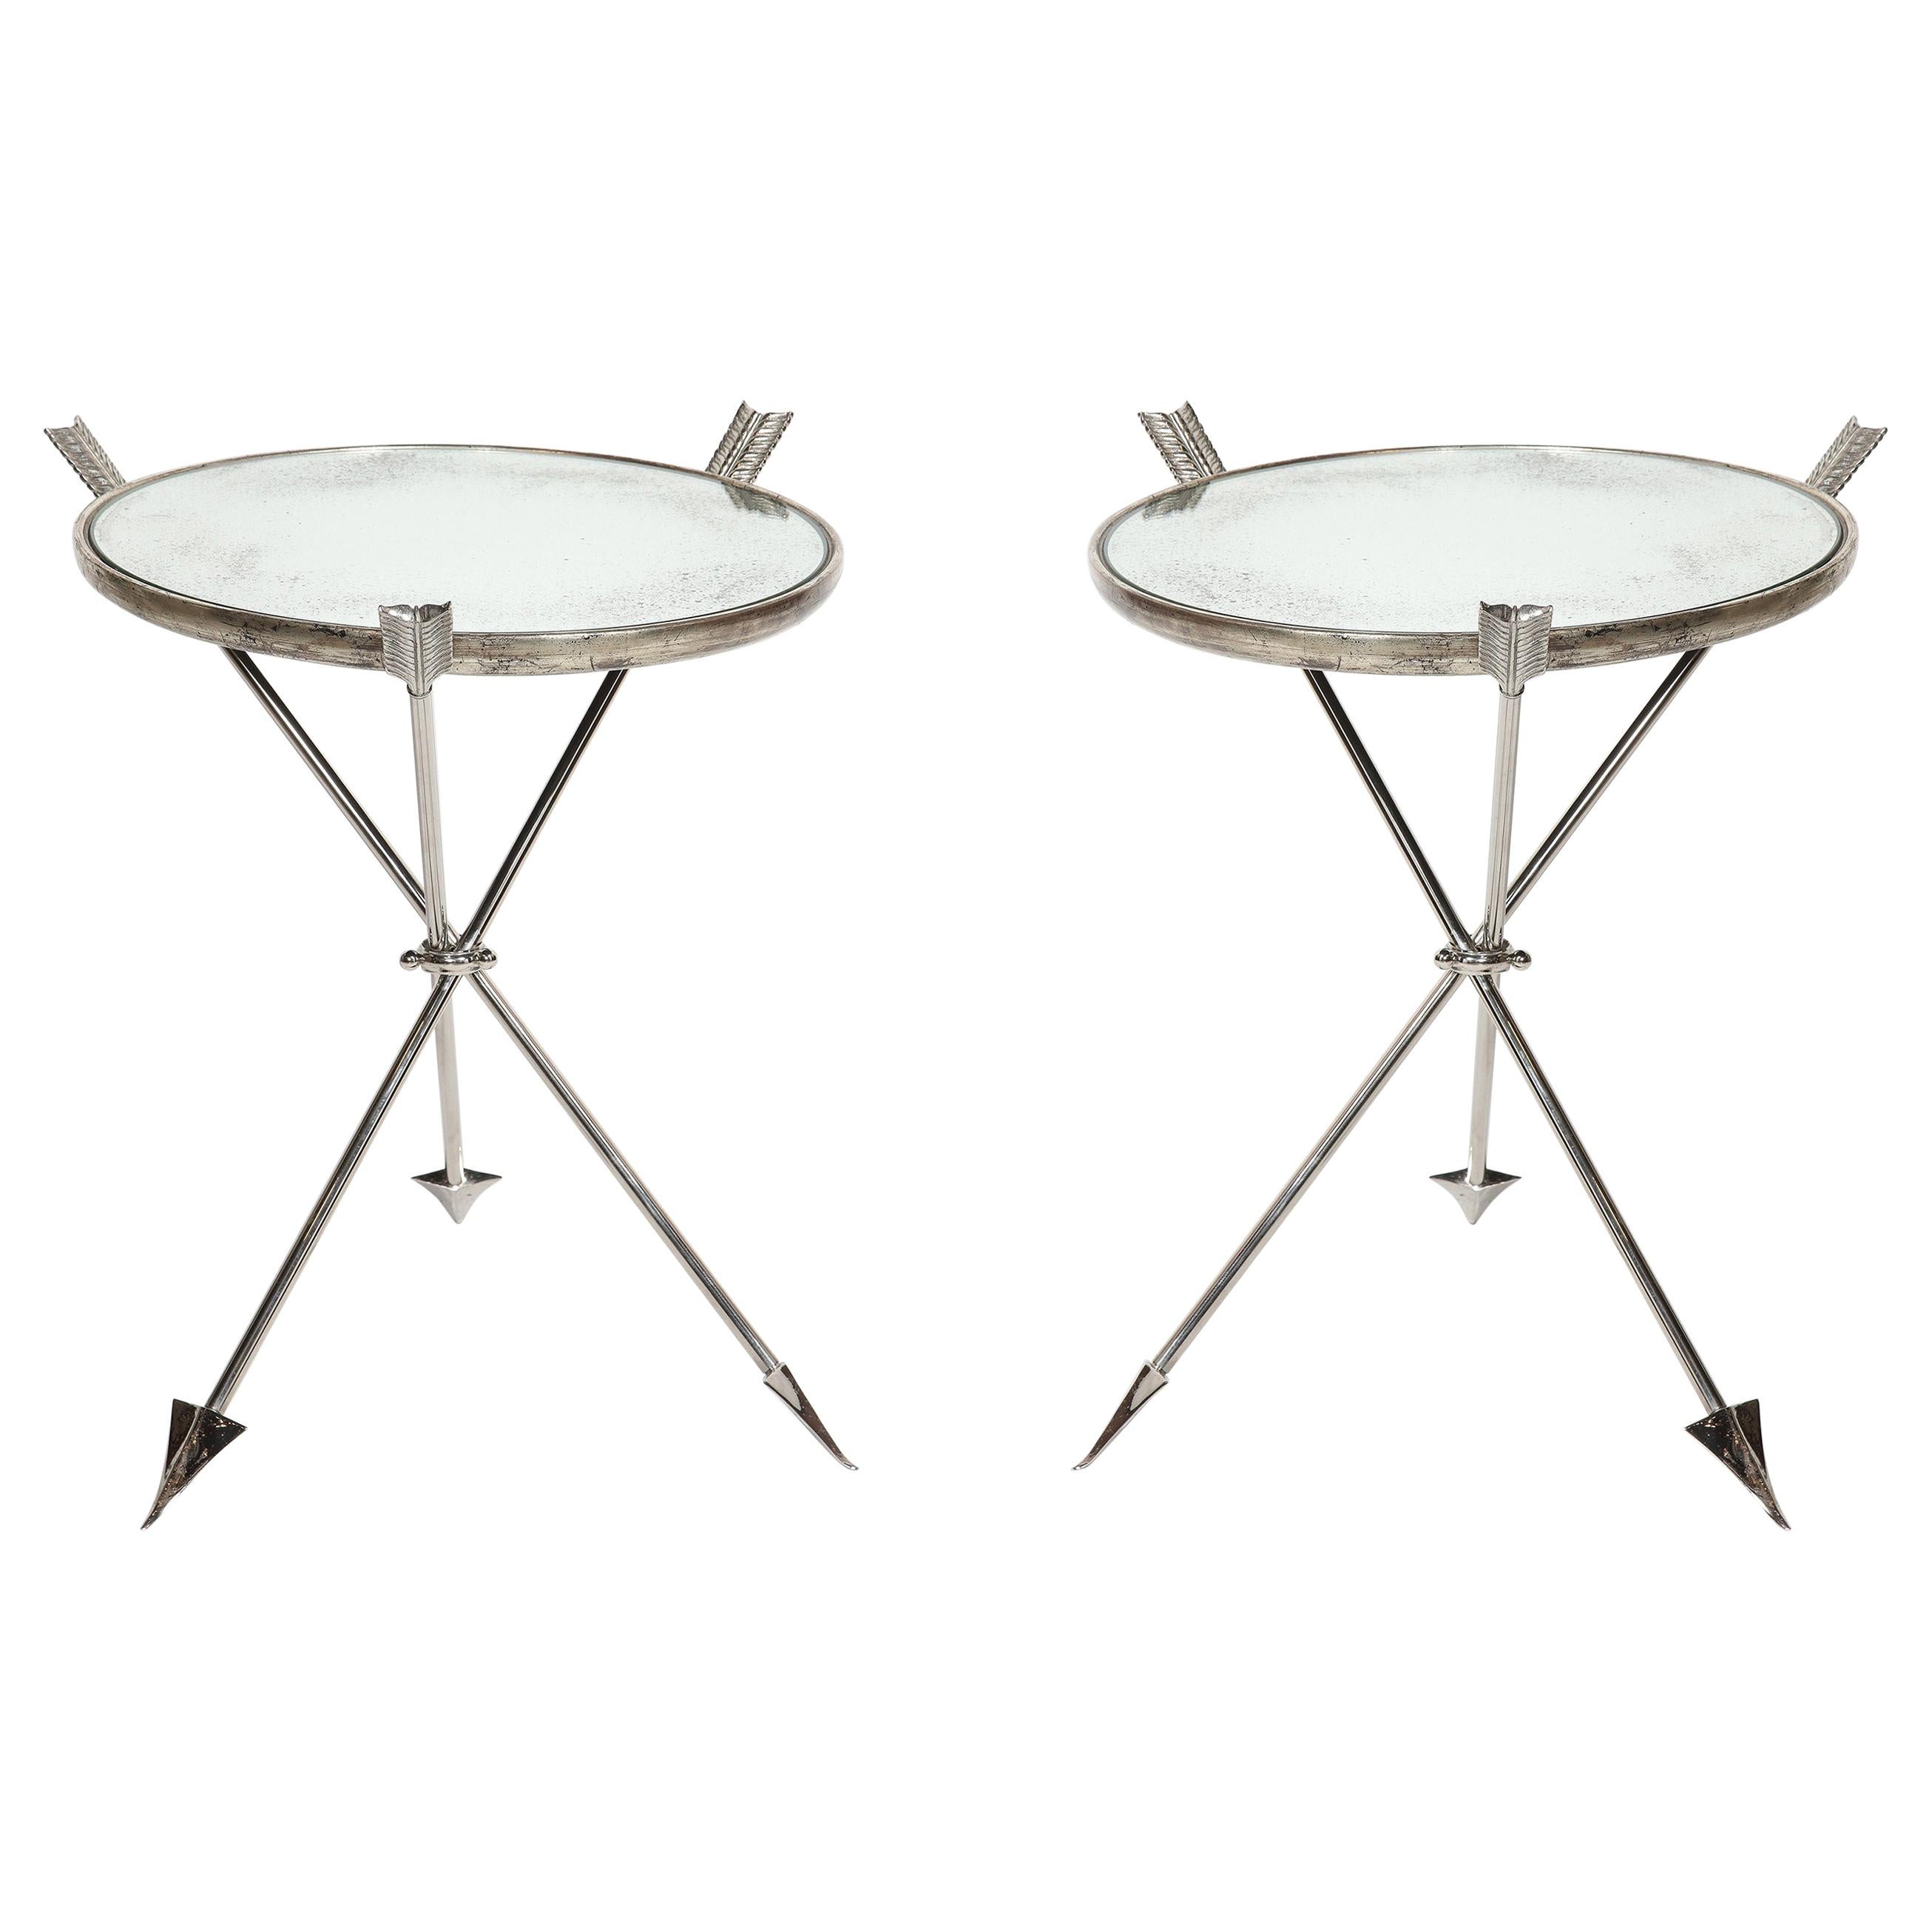 Pair of Mirrored Tables